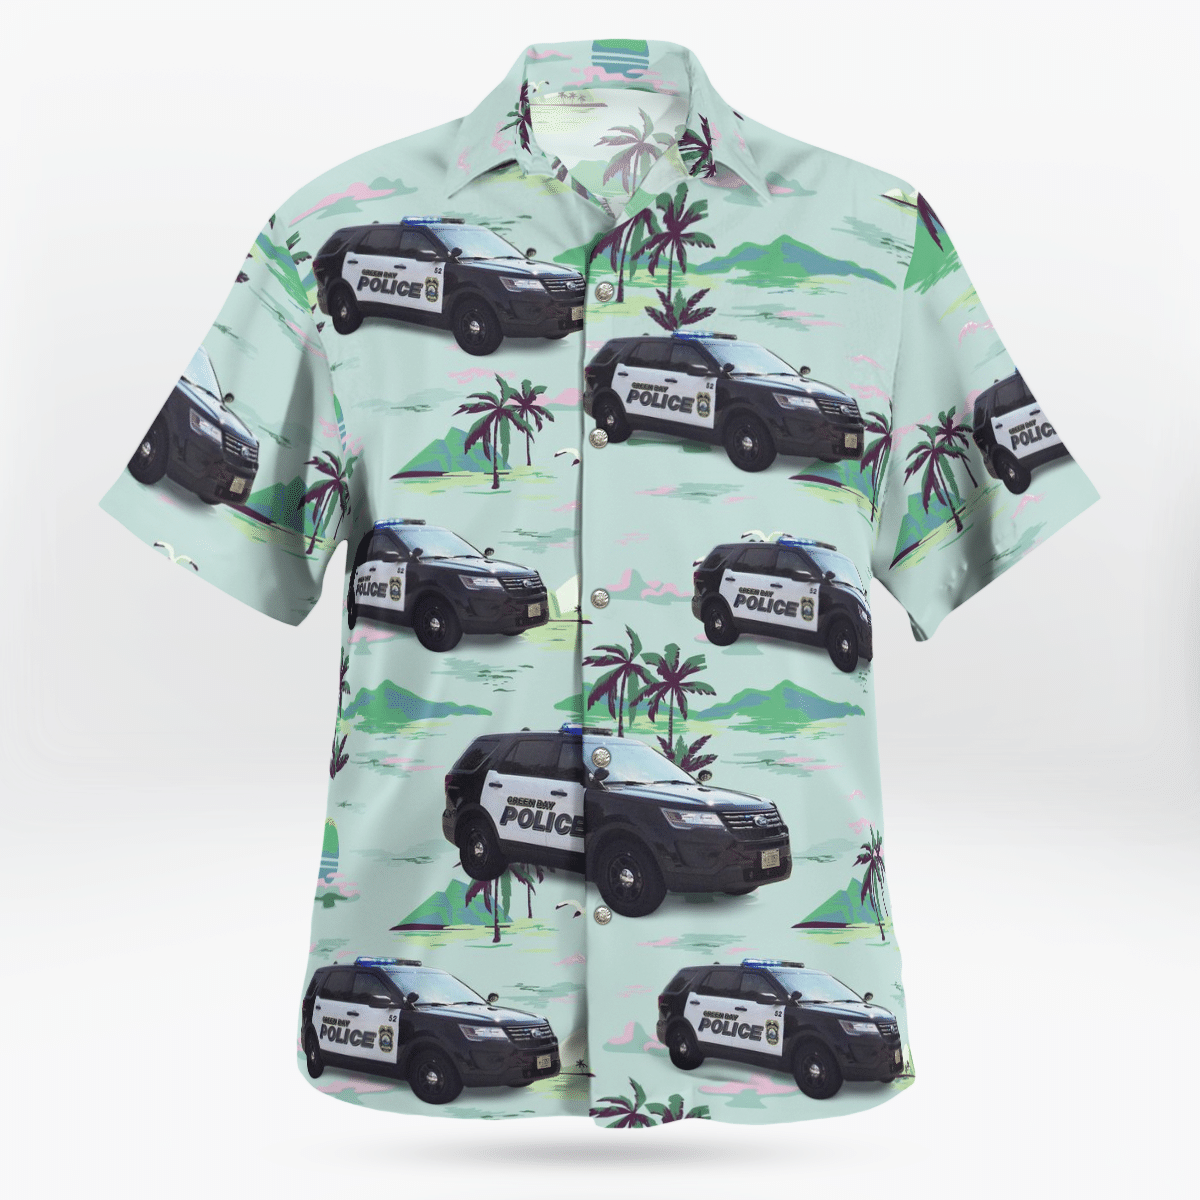 Hawaiian shirts never go out of style 159